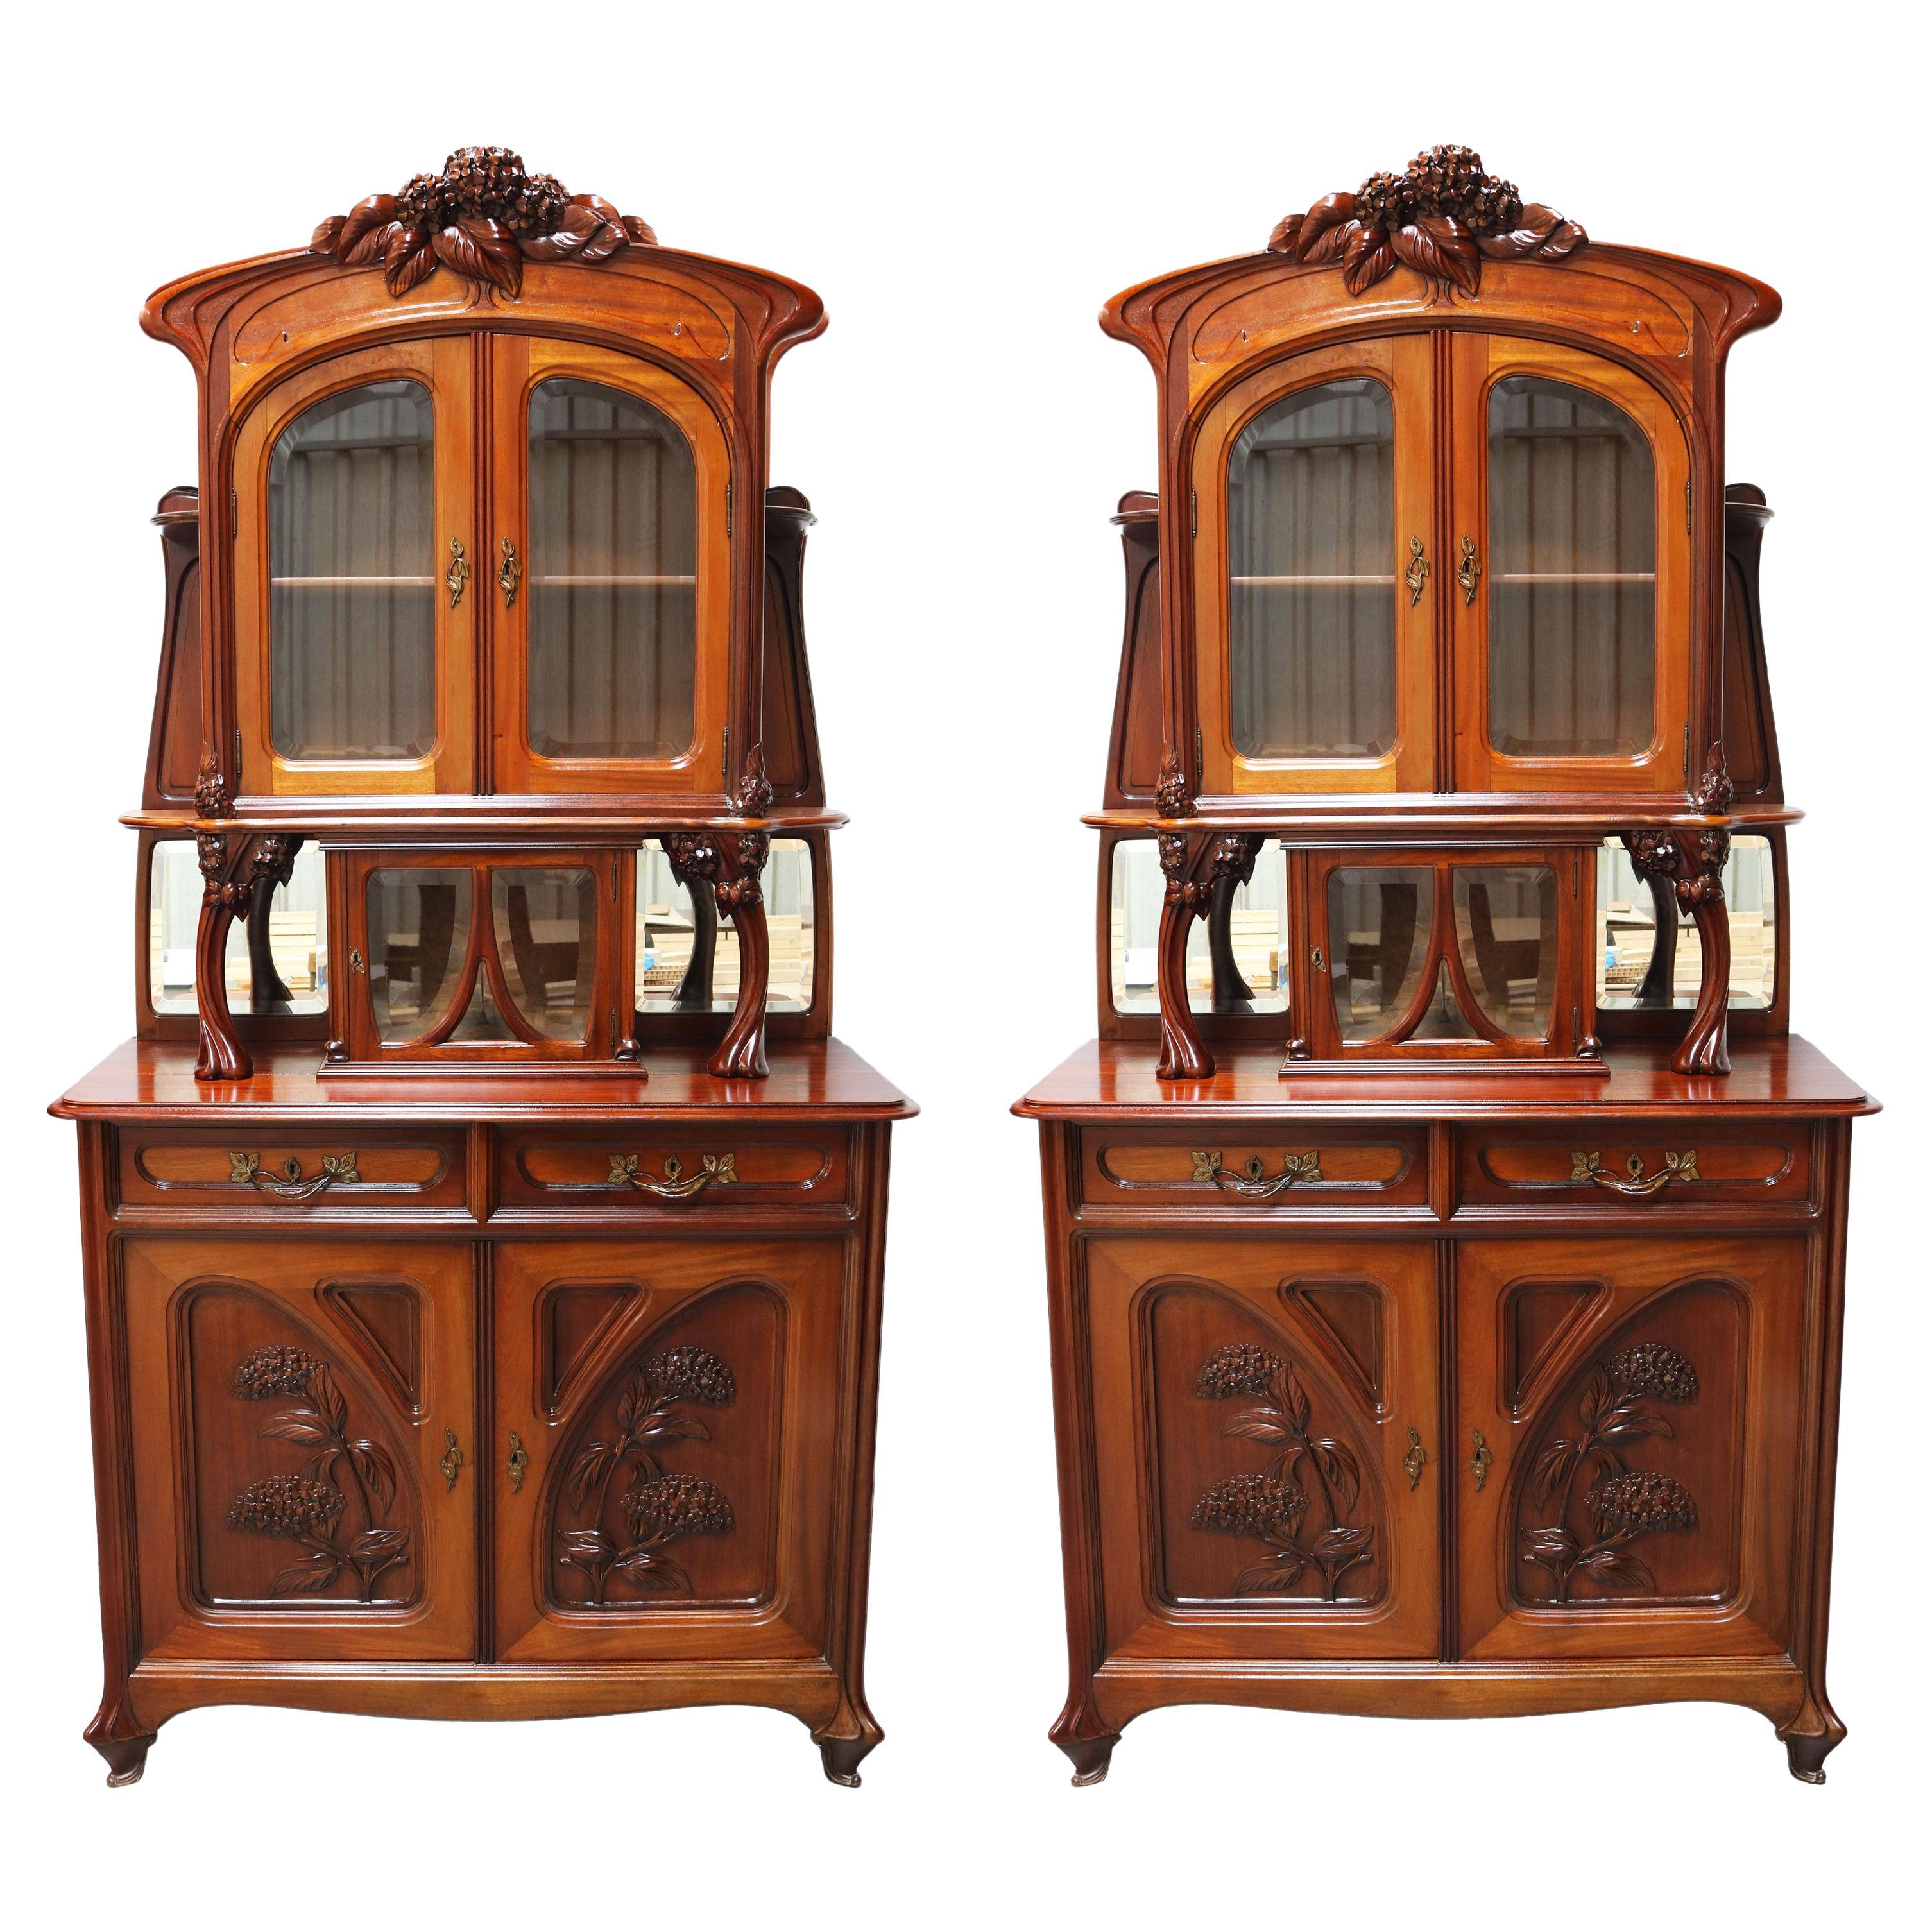 Hand-Carved Case Pieces and Storage Cabinets